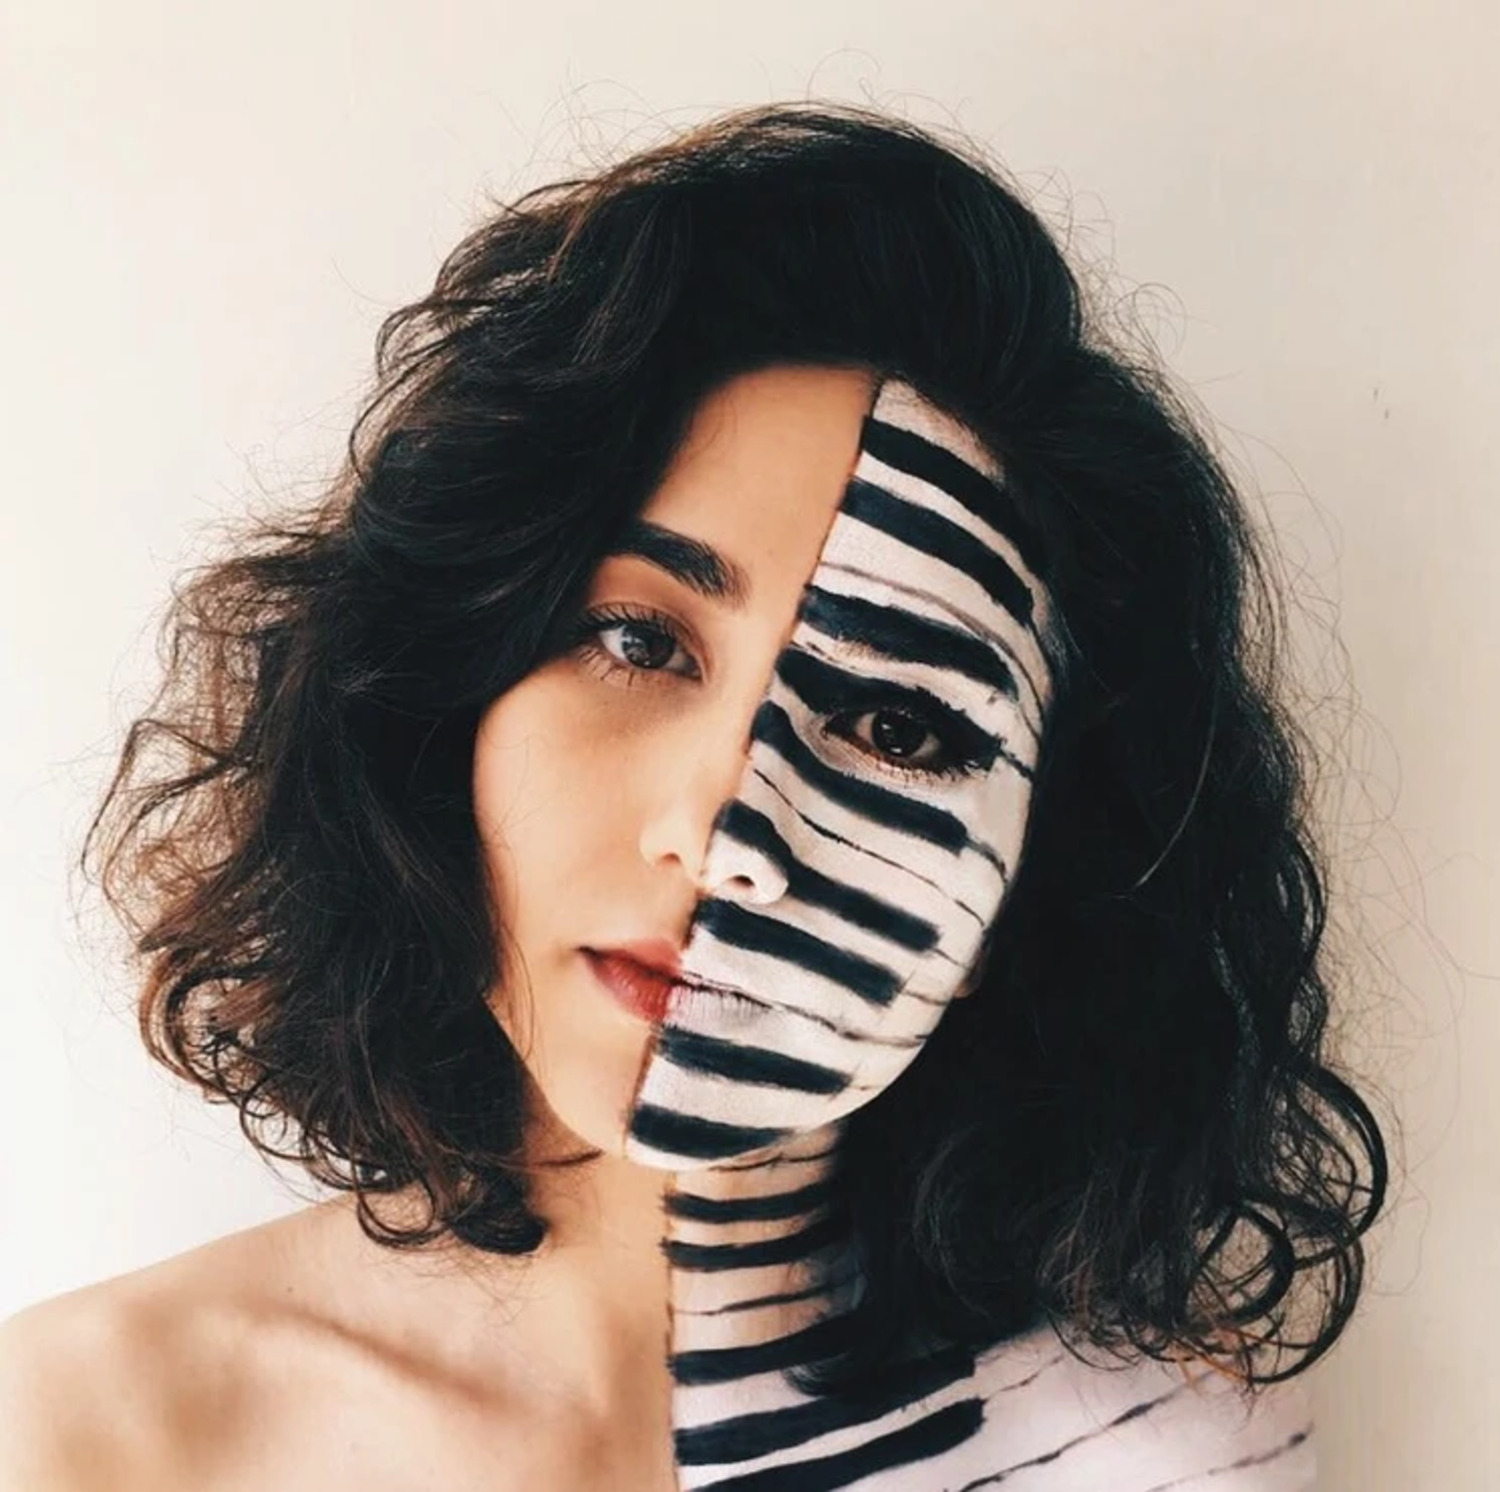 Pianist Beyza Yazgan performs April 21 at the First Presbyterian Church of East Hampton in a benefit for the Matthew Lester pollinator garden. COURTESY THE ARTIST